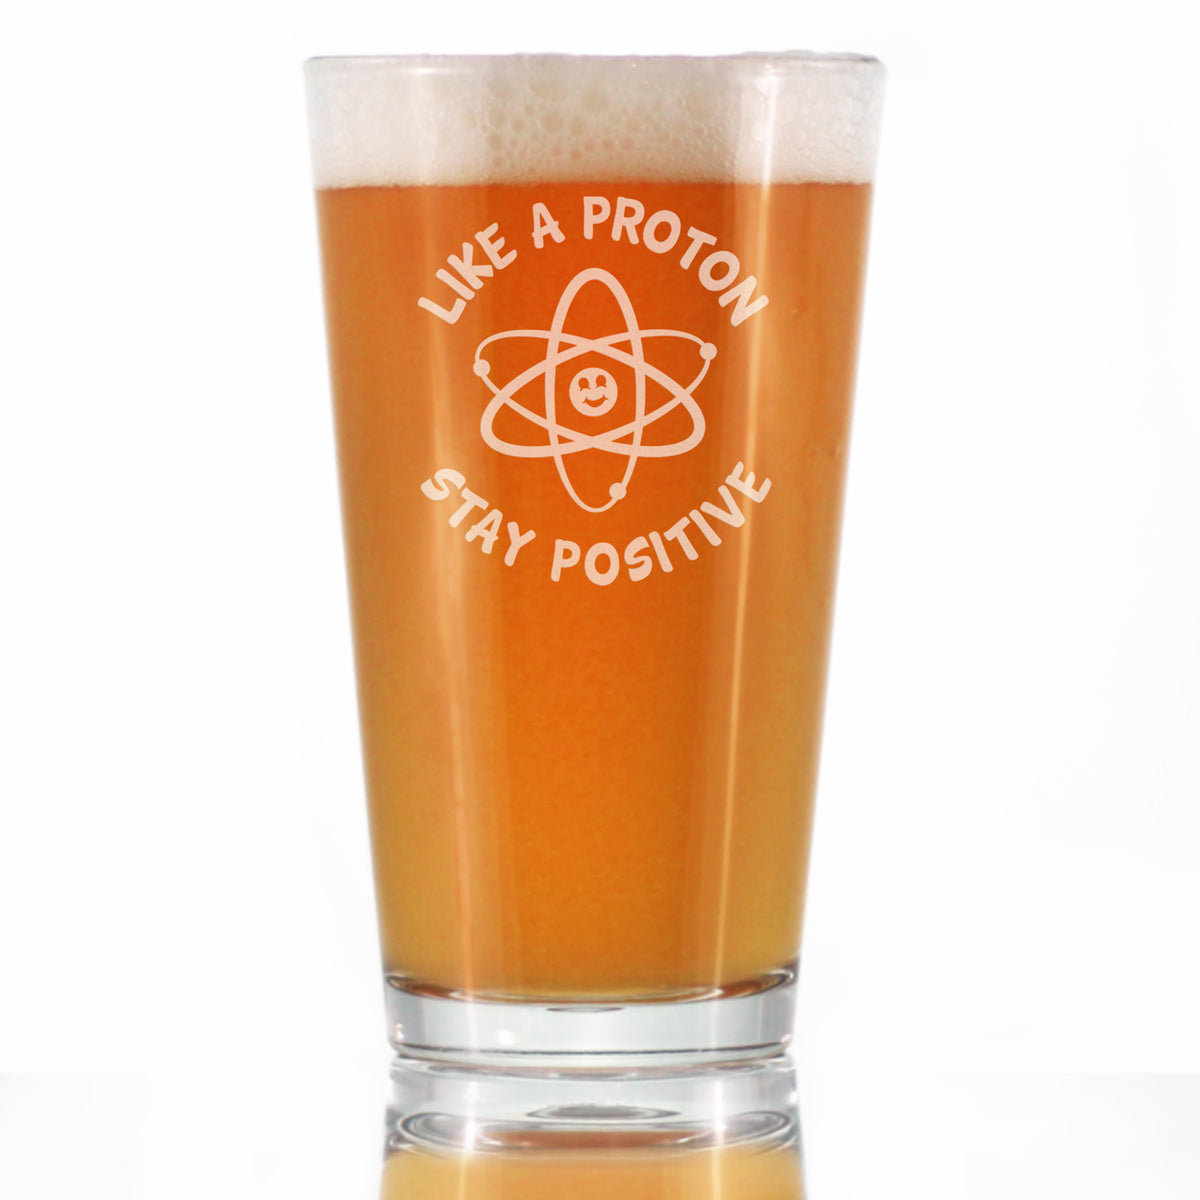 Like A Proton, Stay Positive - Pint Glass for Beer - Funny Science Teacher Gifts for Women &amp; Men - 16 oz Glasses